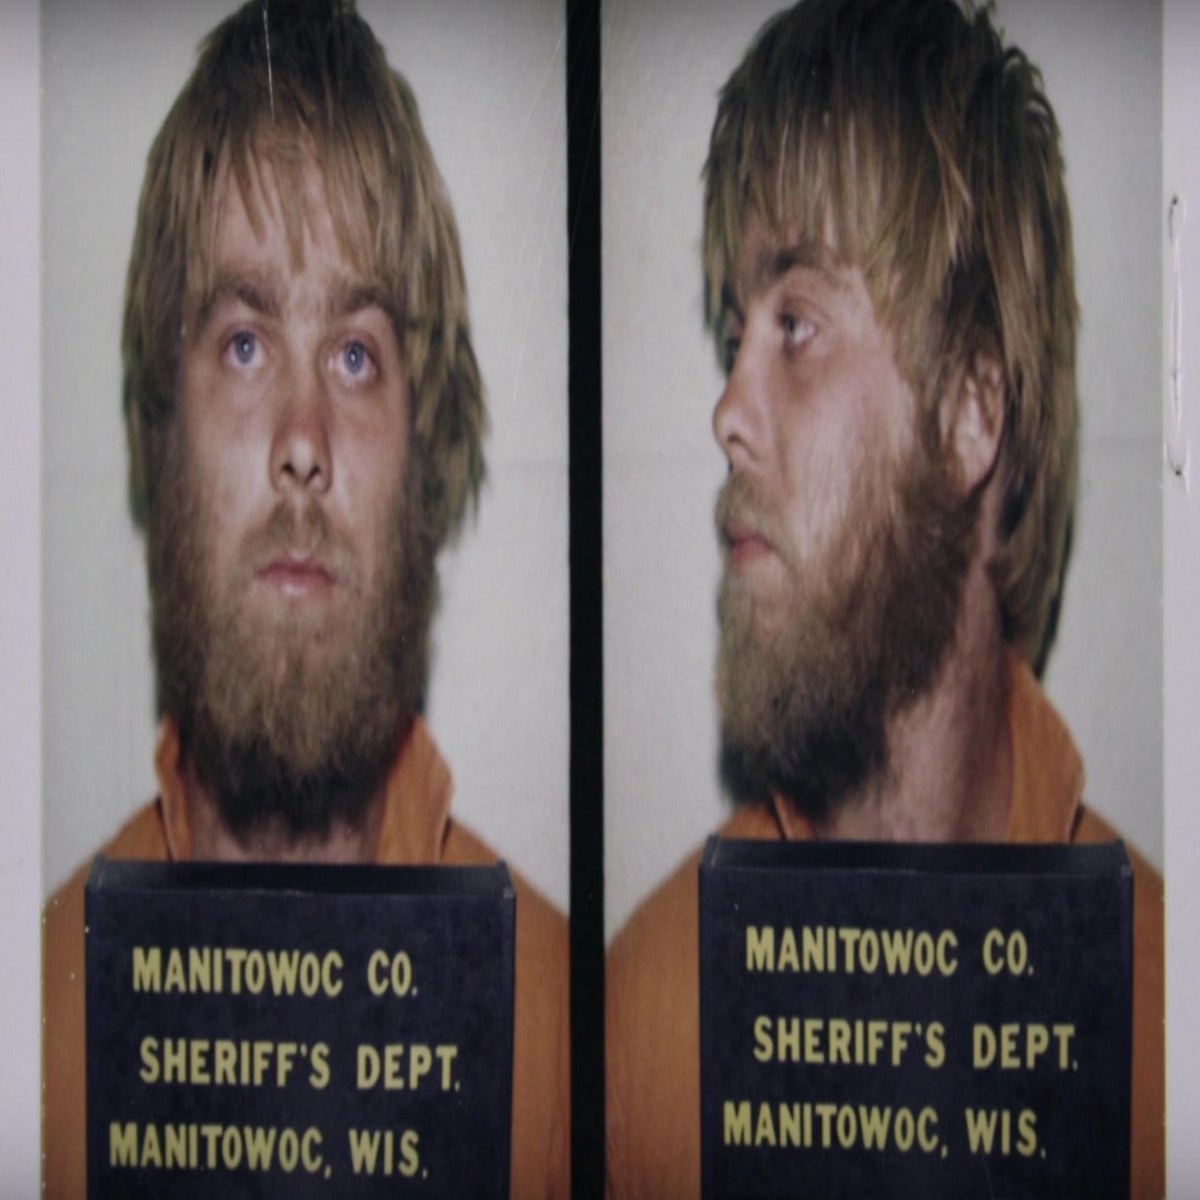 Steven Avery case: Blood evidence 'not properly protected' by cops